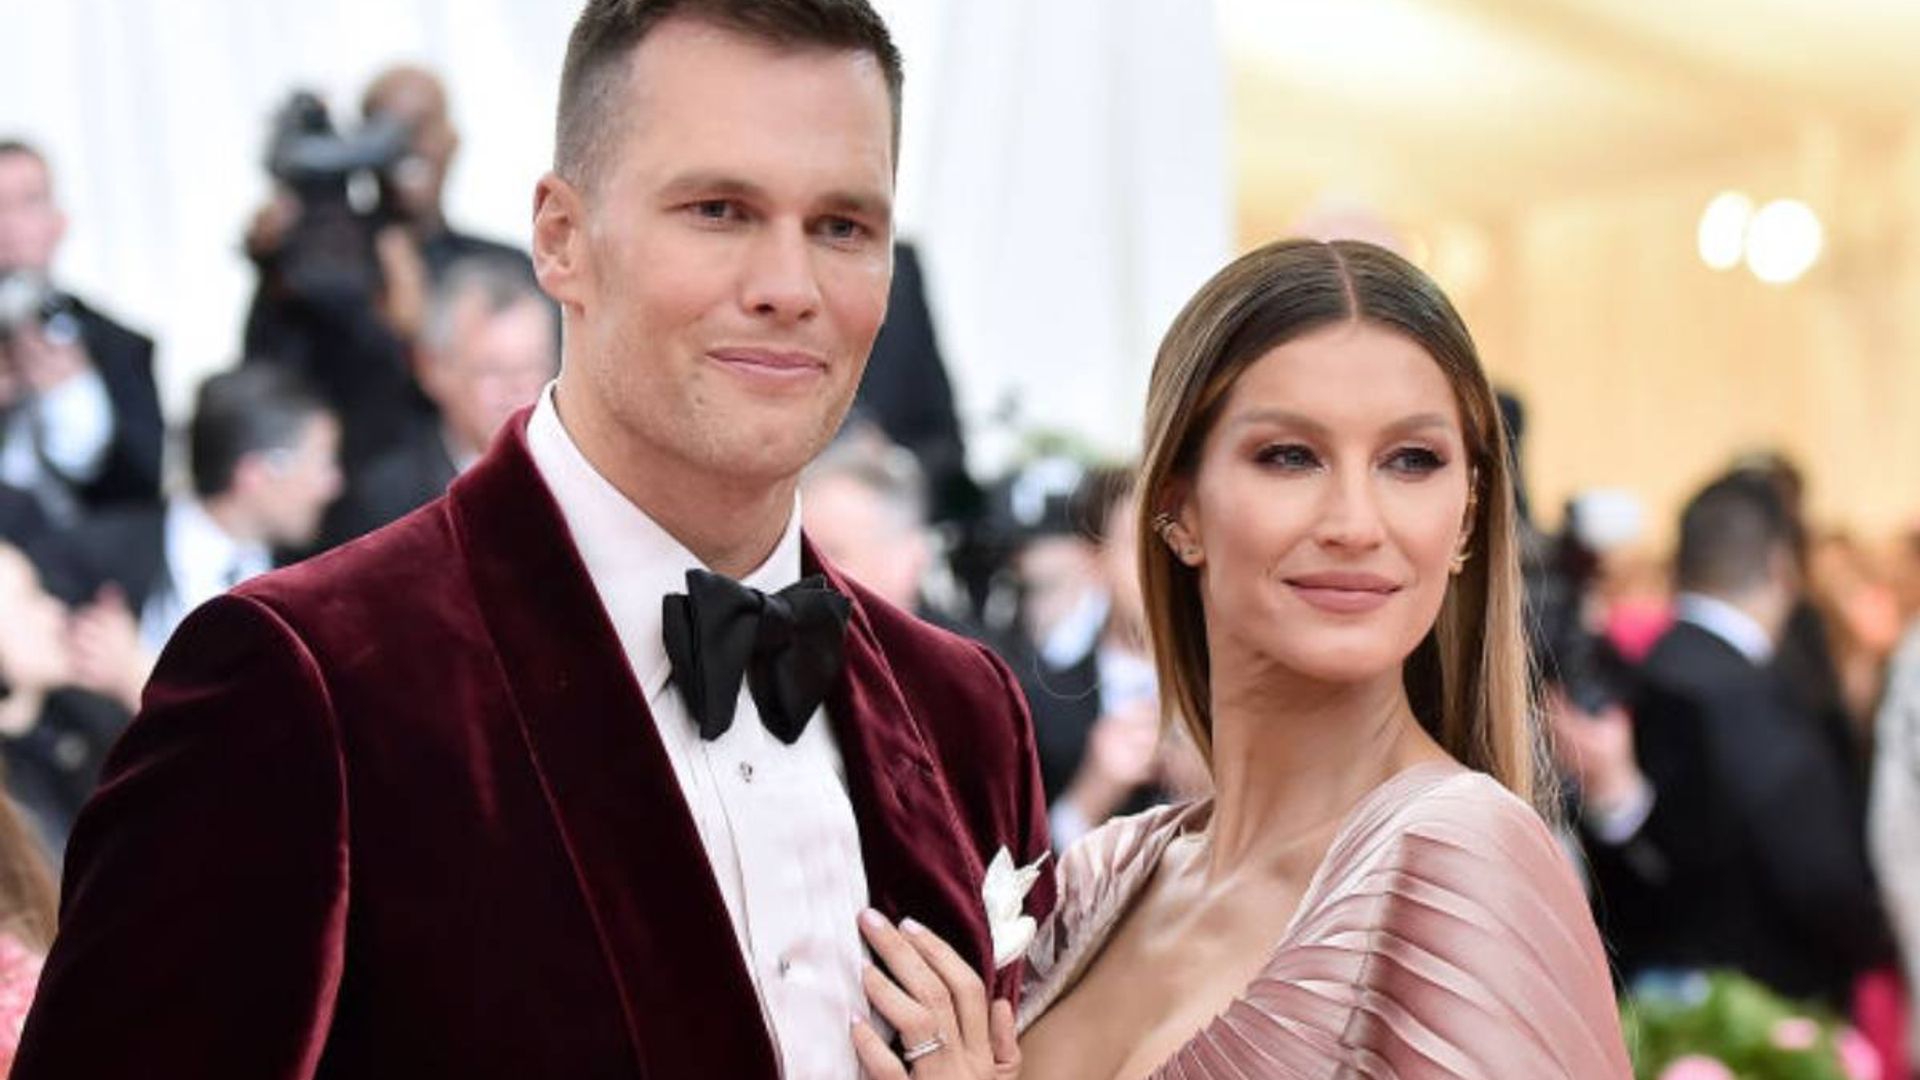 Gisele Bundchen turns heads with stunning new photoshoot - and husband Tom Brady approves